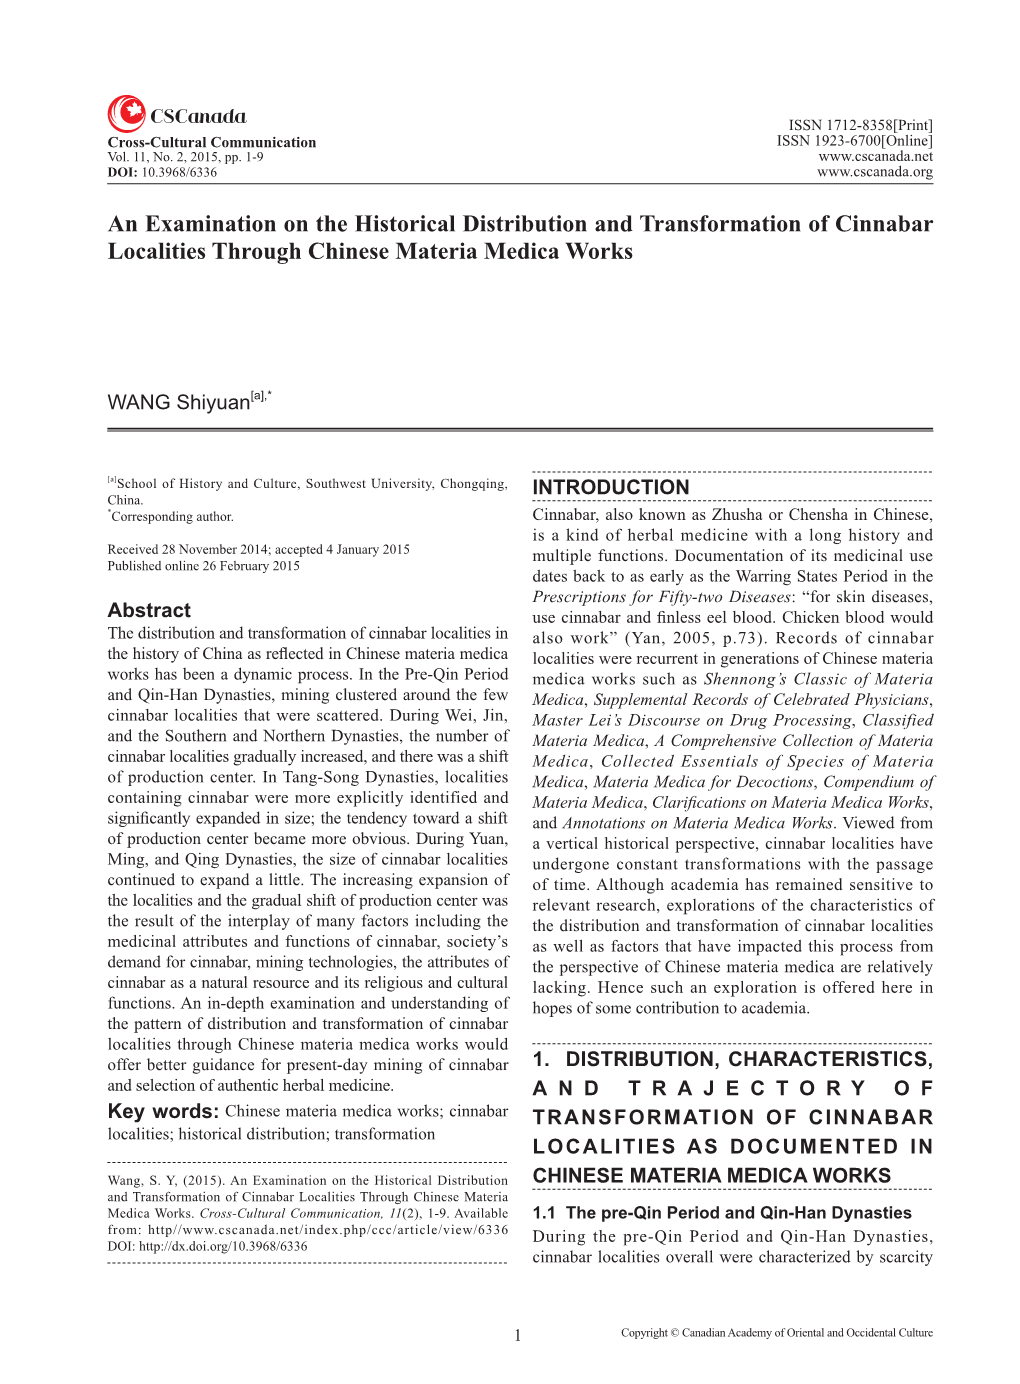 An Examination on the Historical Distribution and Transformation of Cinnabar Localities Through Chinese Materia Medica Works